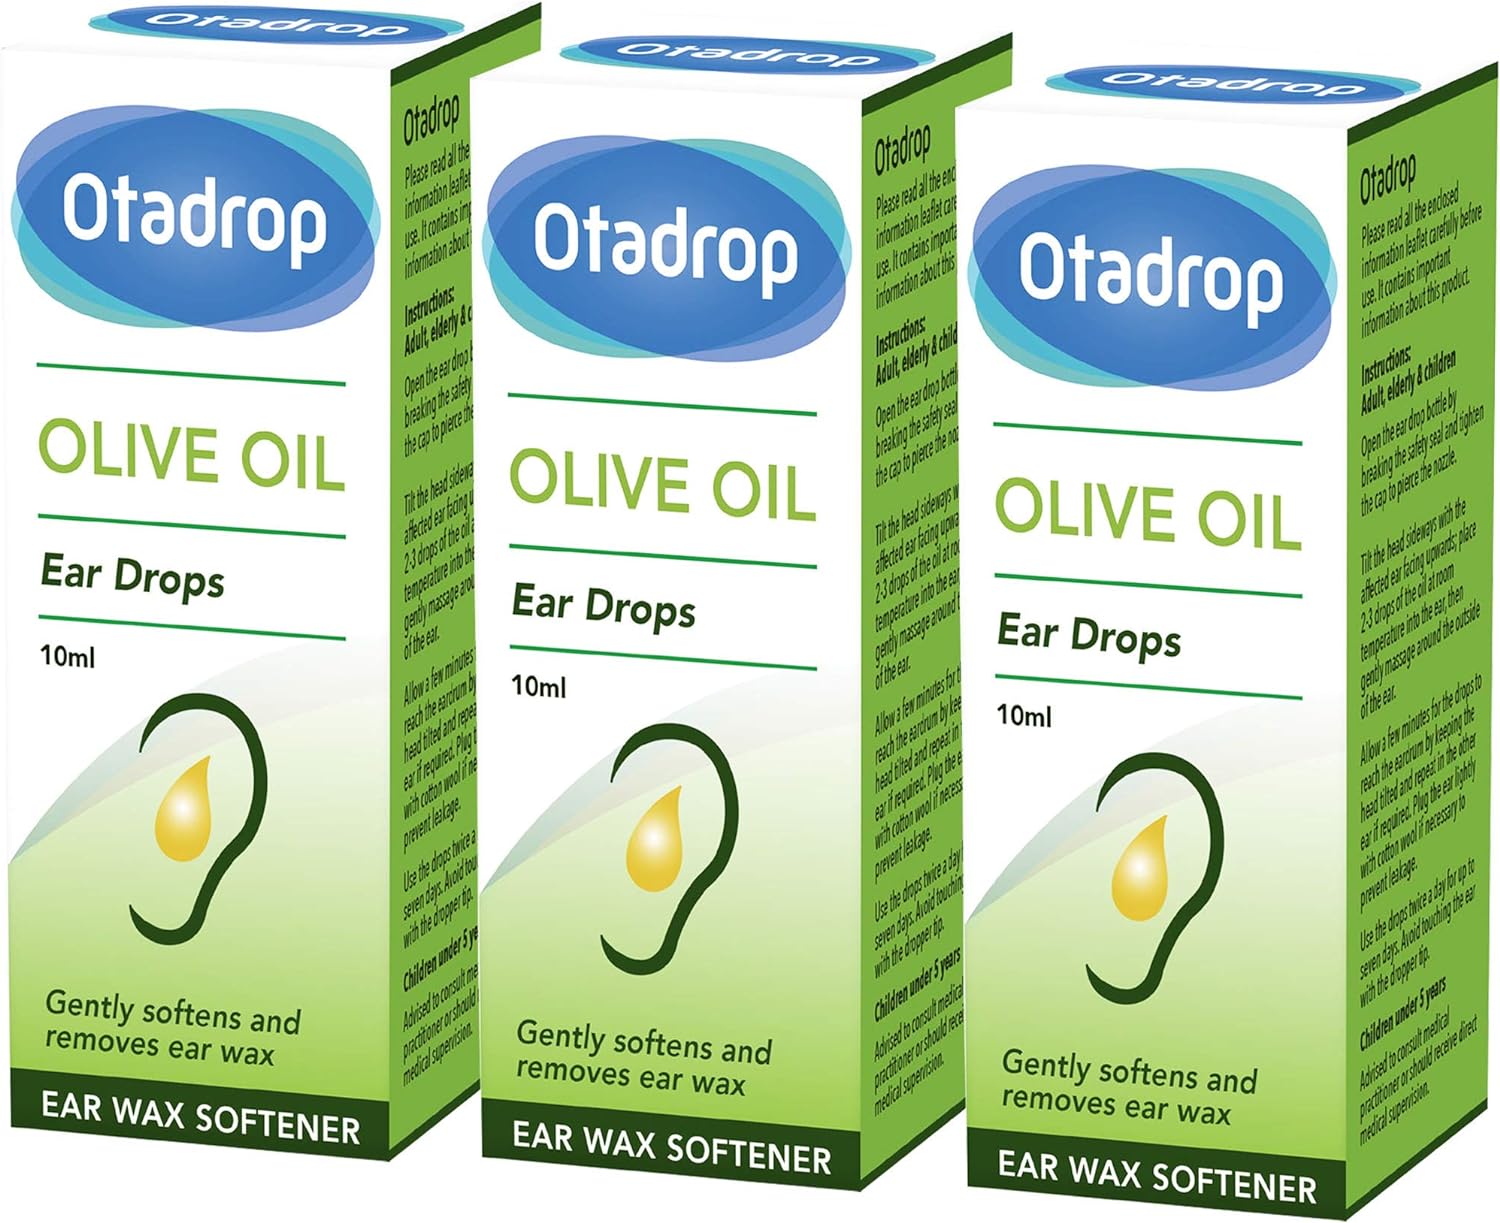 Otadrop Ear Wax Remover Olive Oil Drops 10 ml - Pack of 3